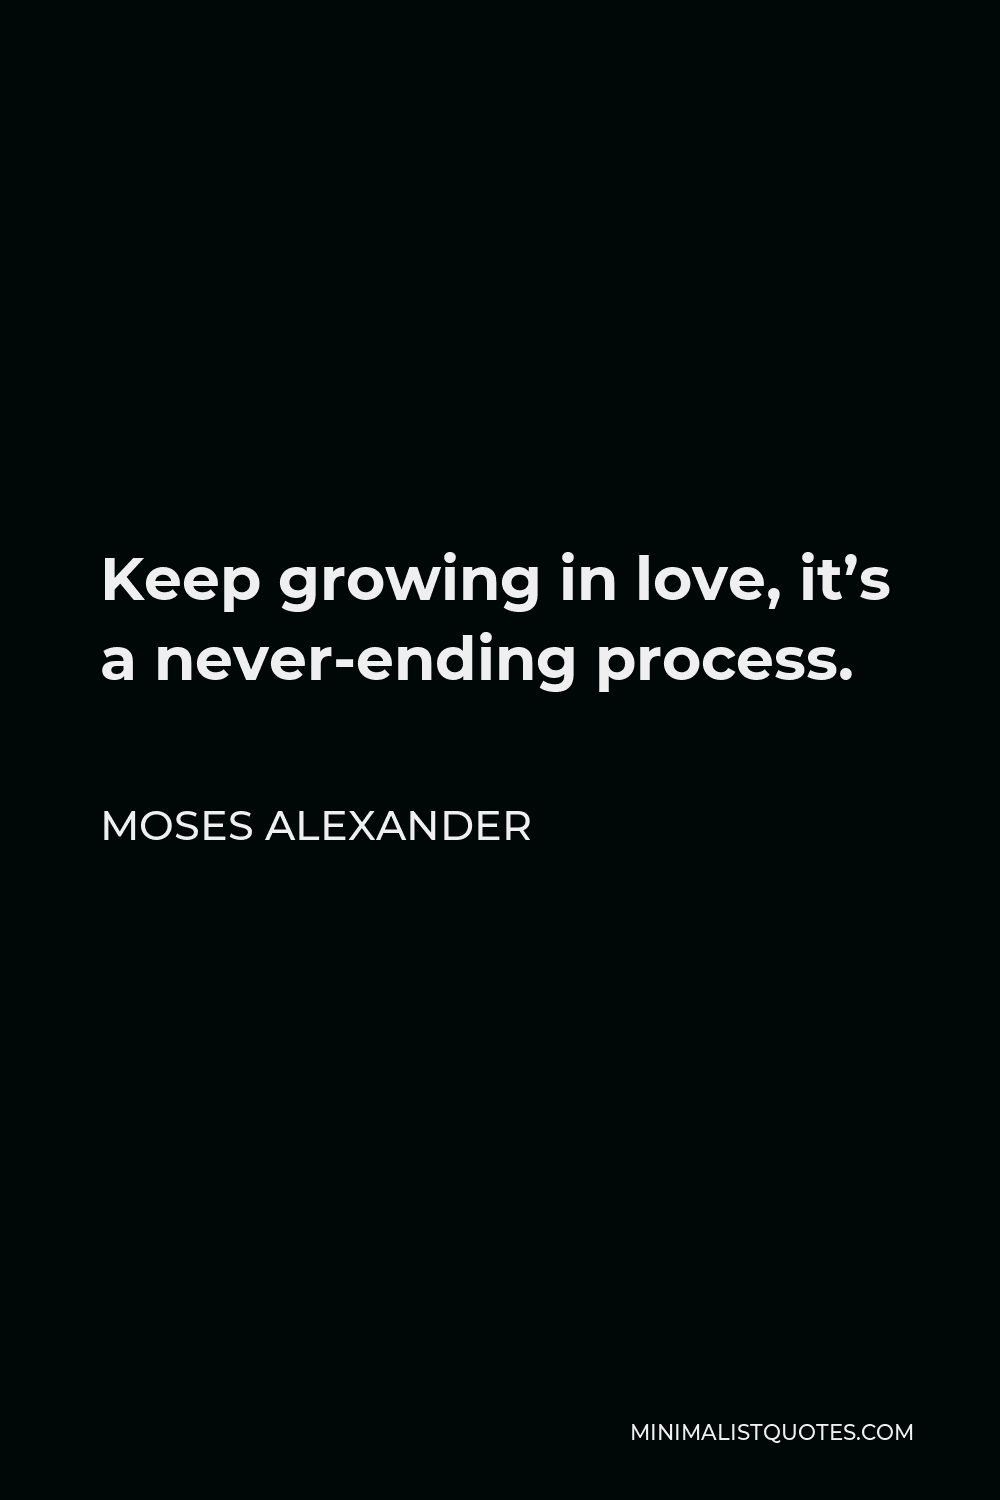 Moses Alexander Quote - Keep growing in love, it’s a never-ending process.